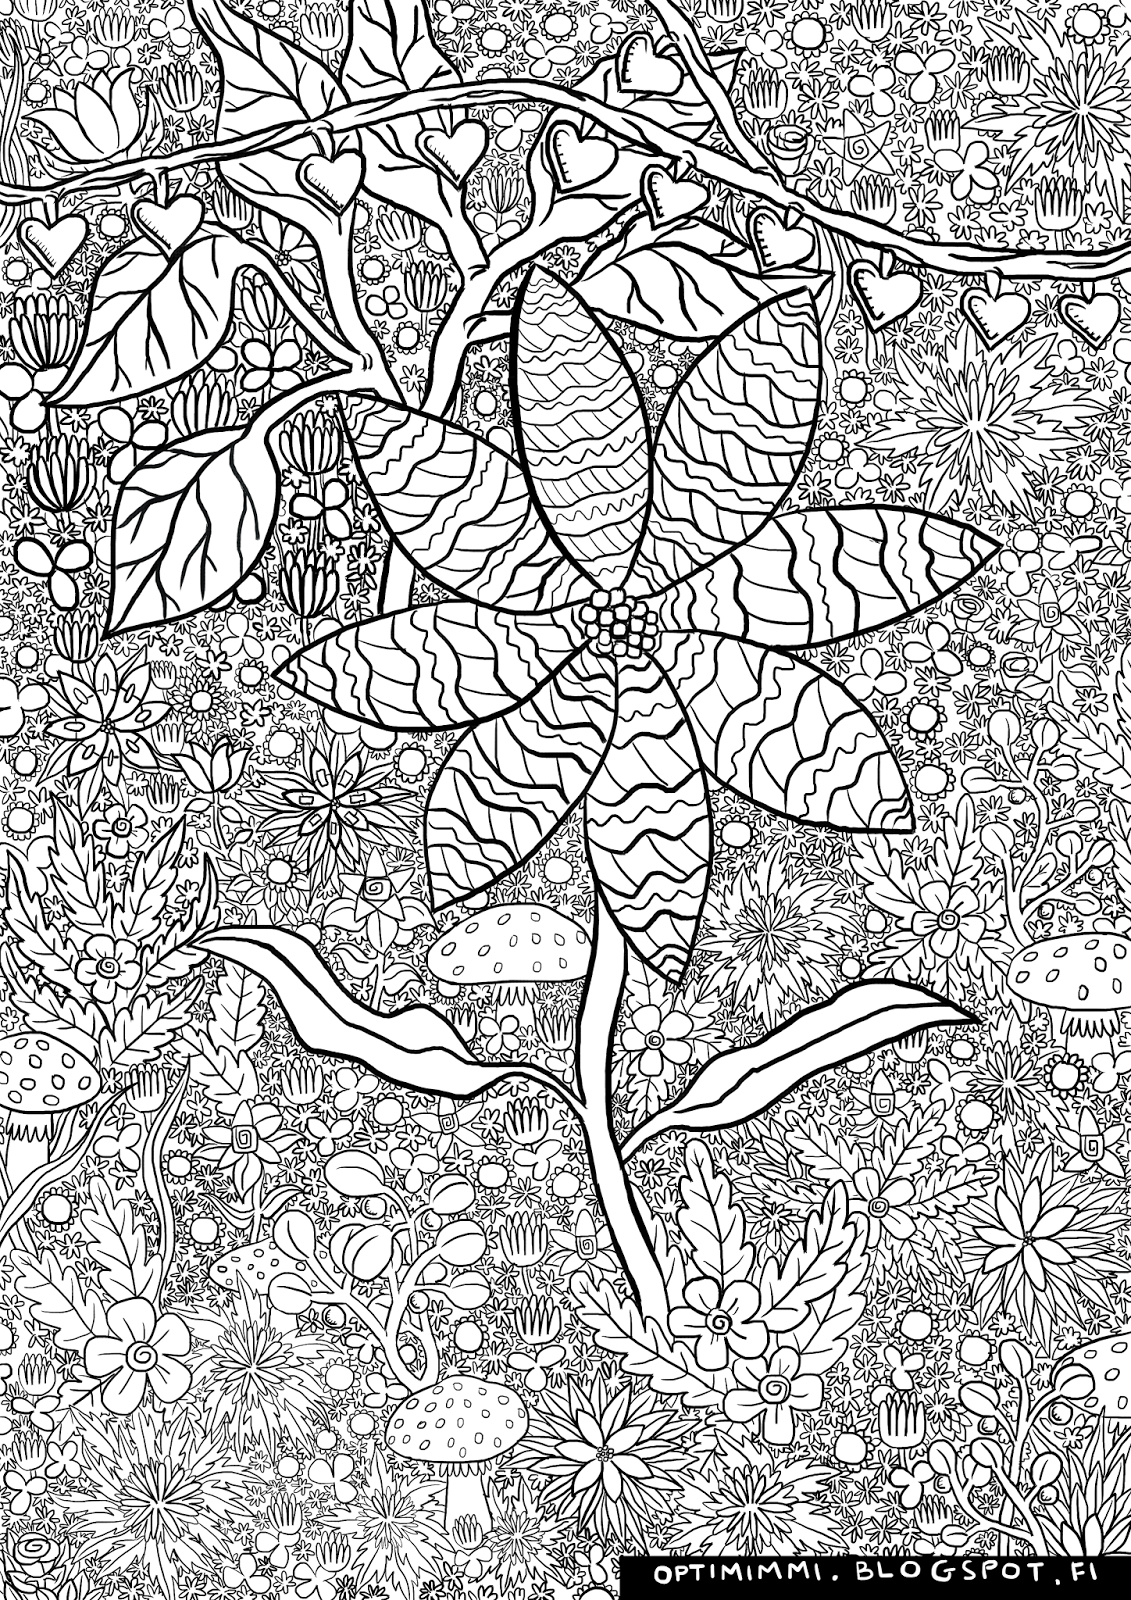 Download OPTIMIMMI: 2016: Coloring pages / 2016: Värityskuvat